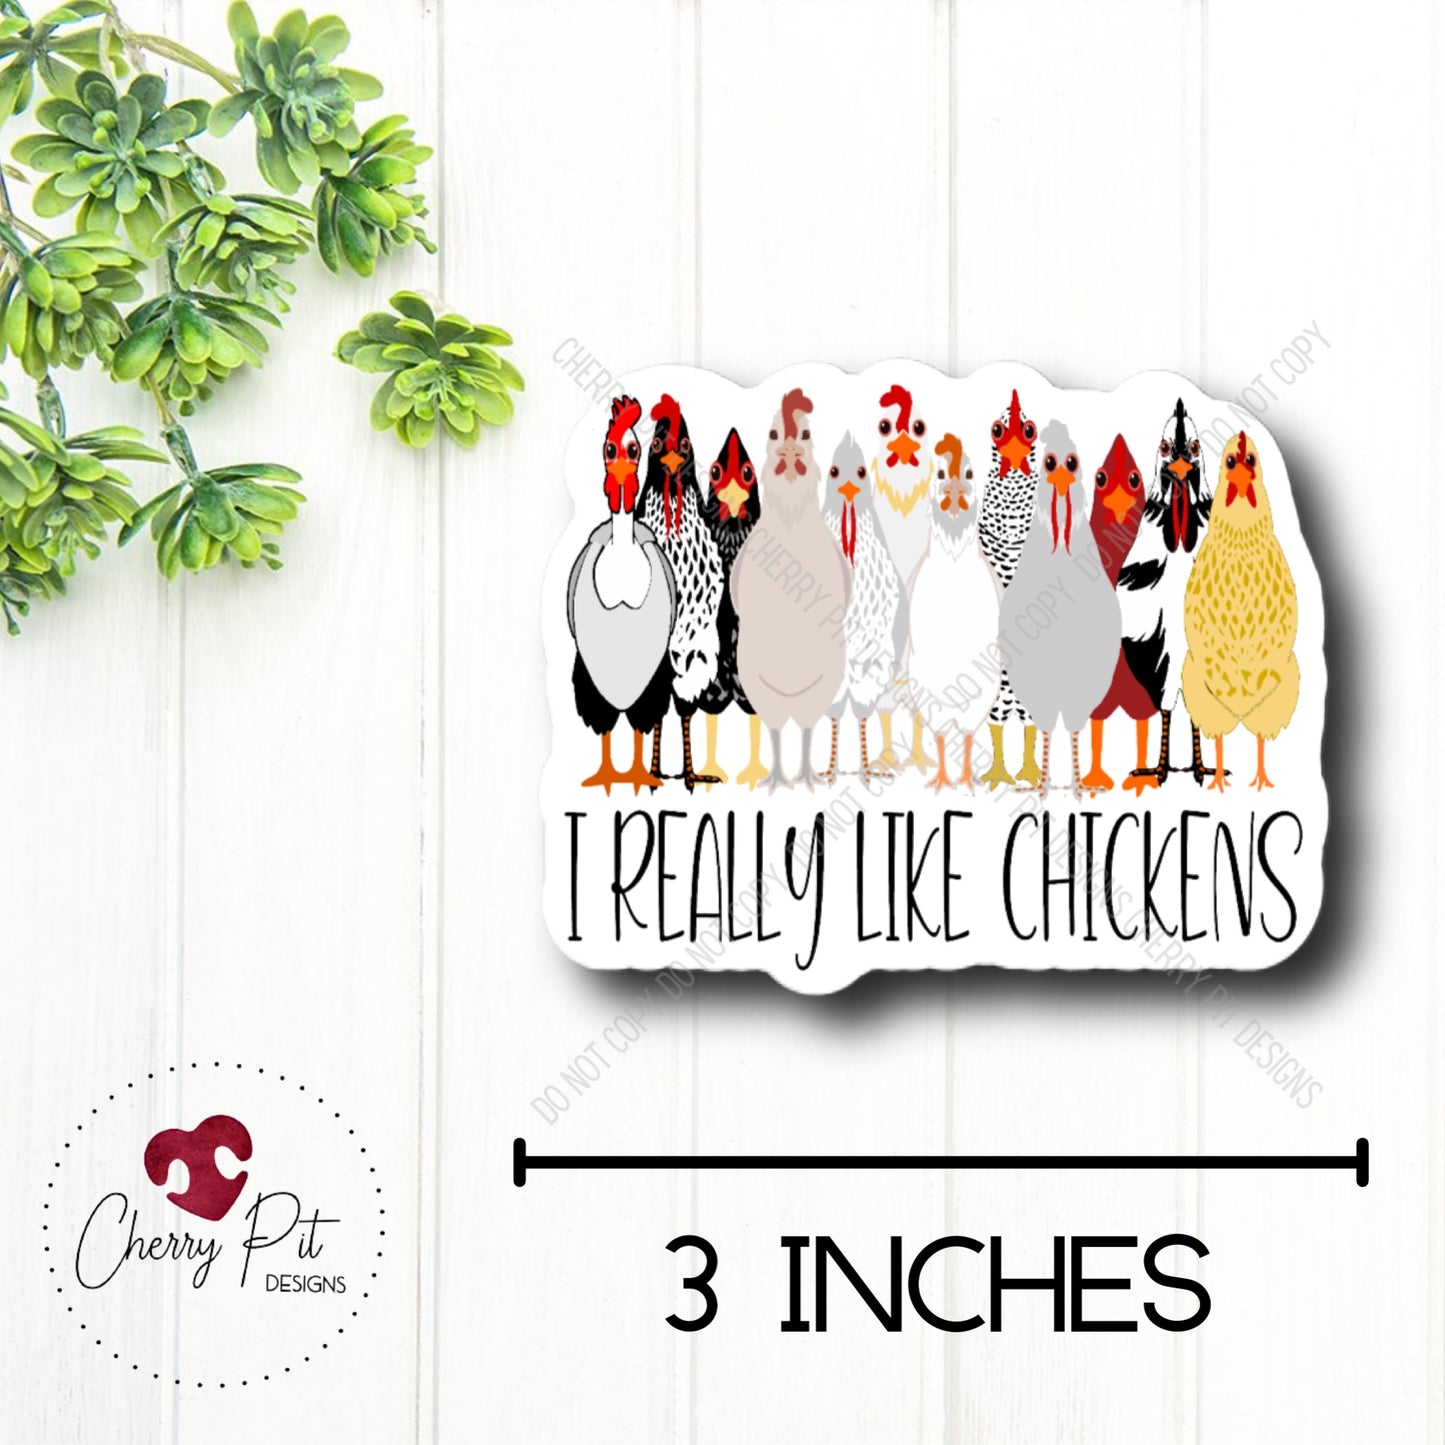 I Really Like Chickens Vinyl Sticker Decal - Cherry Pit Designs